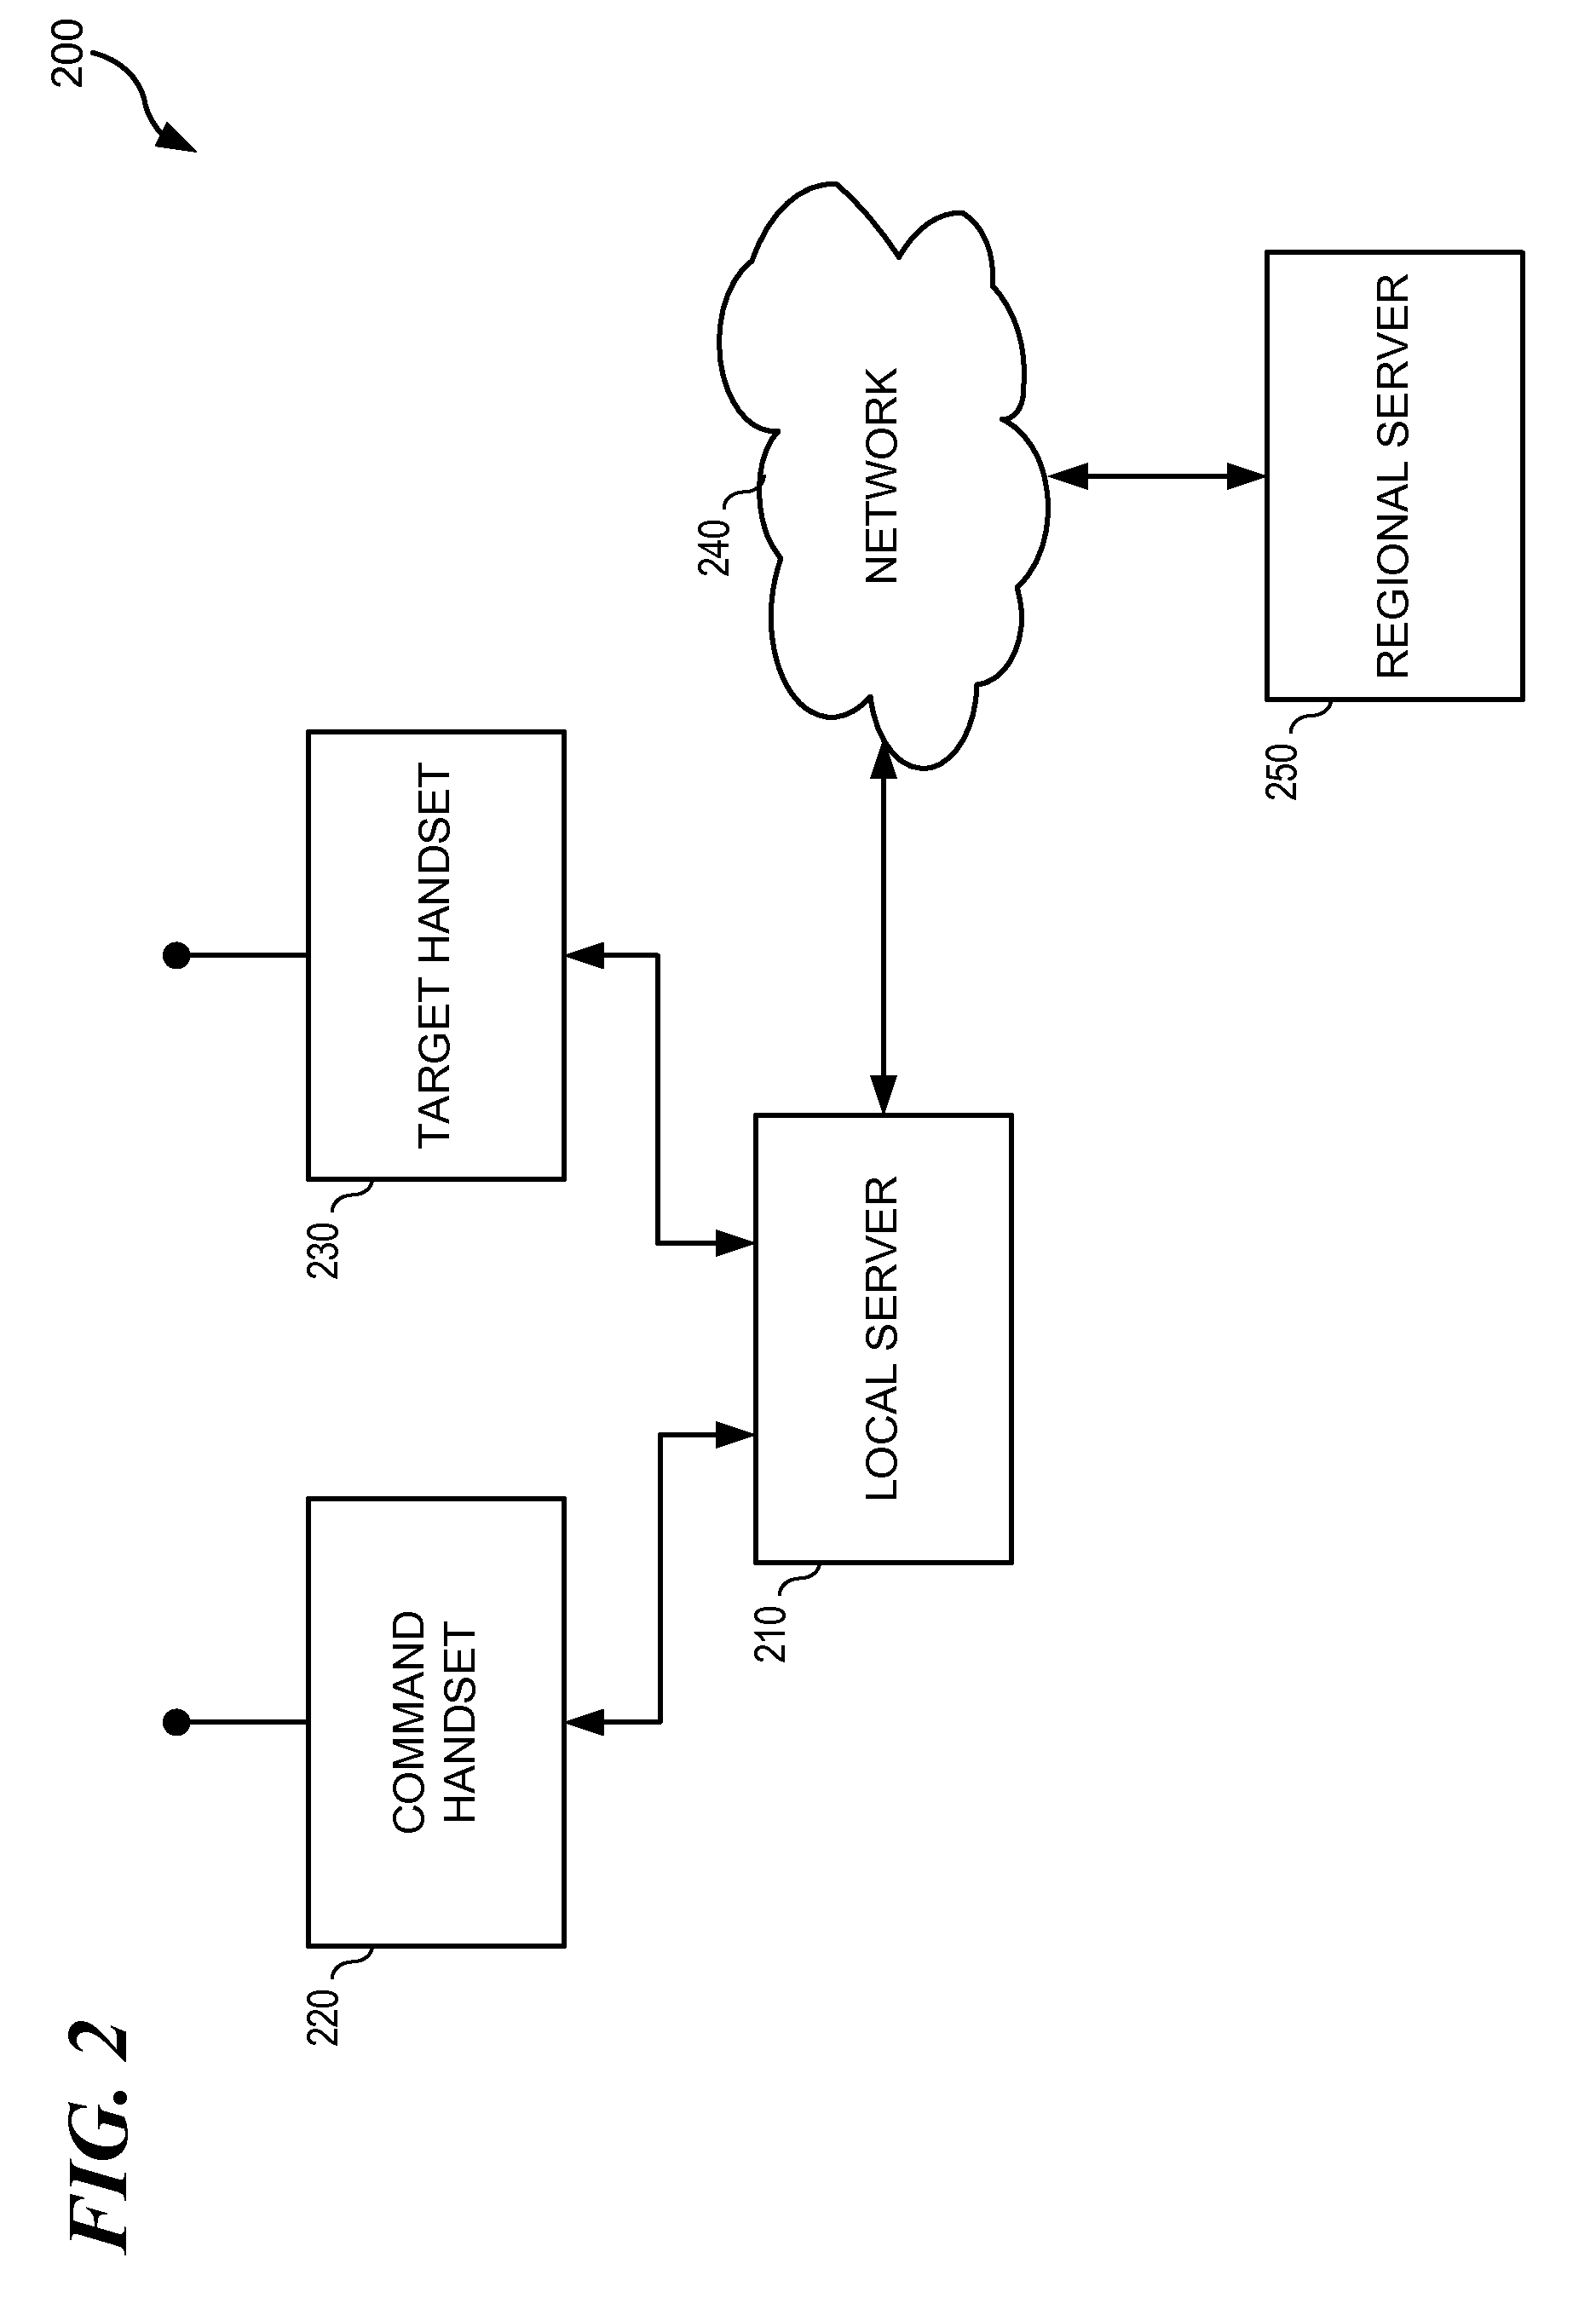 System and method for improving mobile device safety by selectively disabling device features during unsafe operational conditions